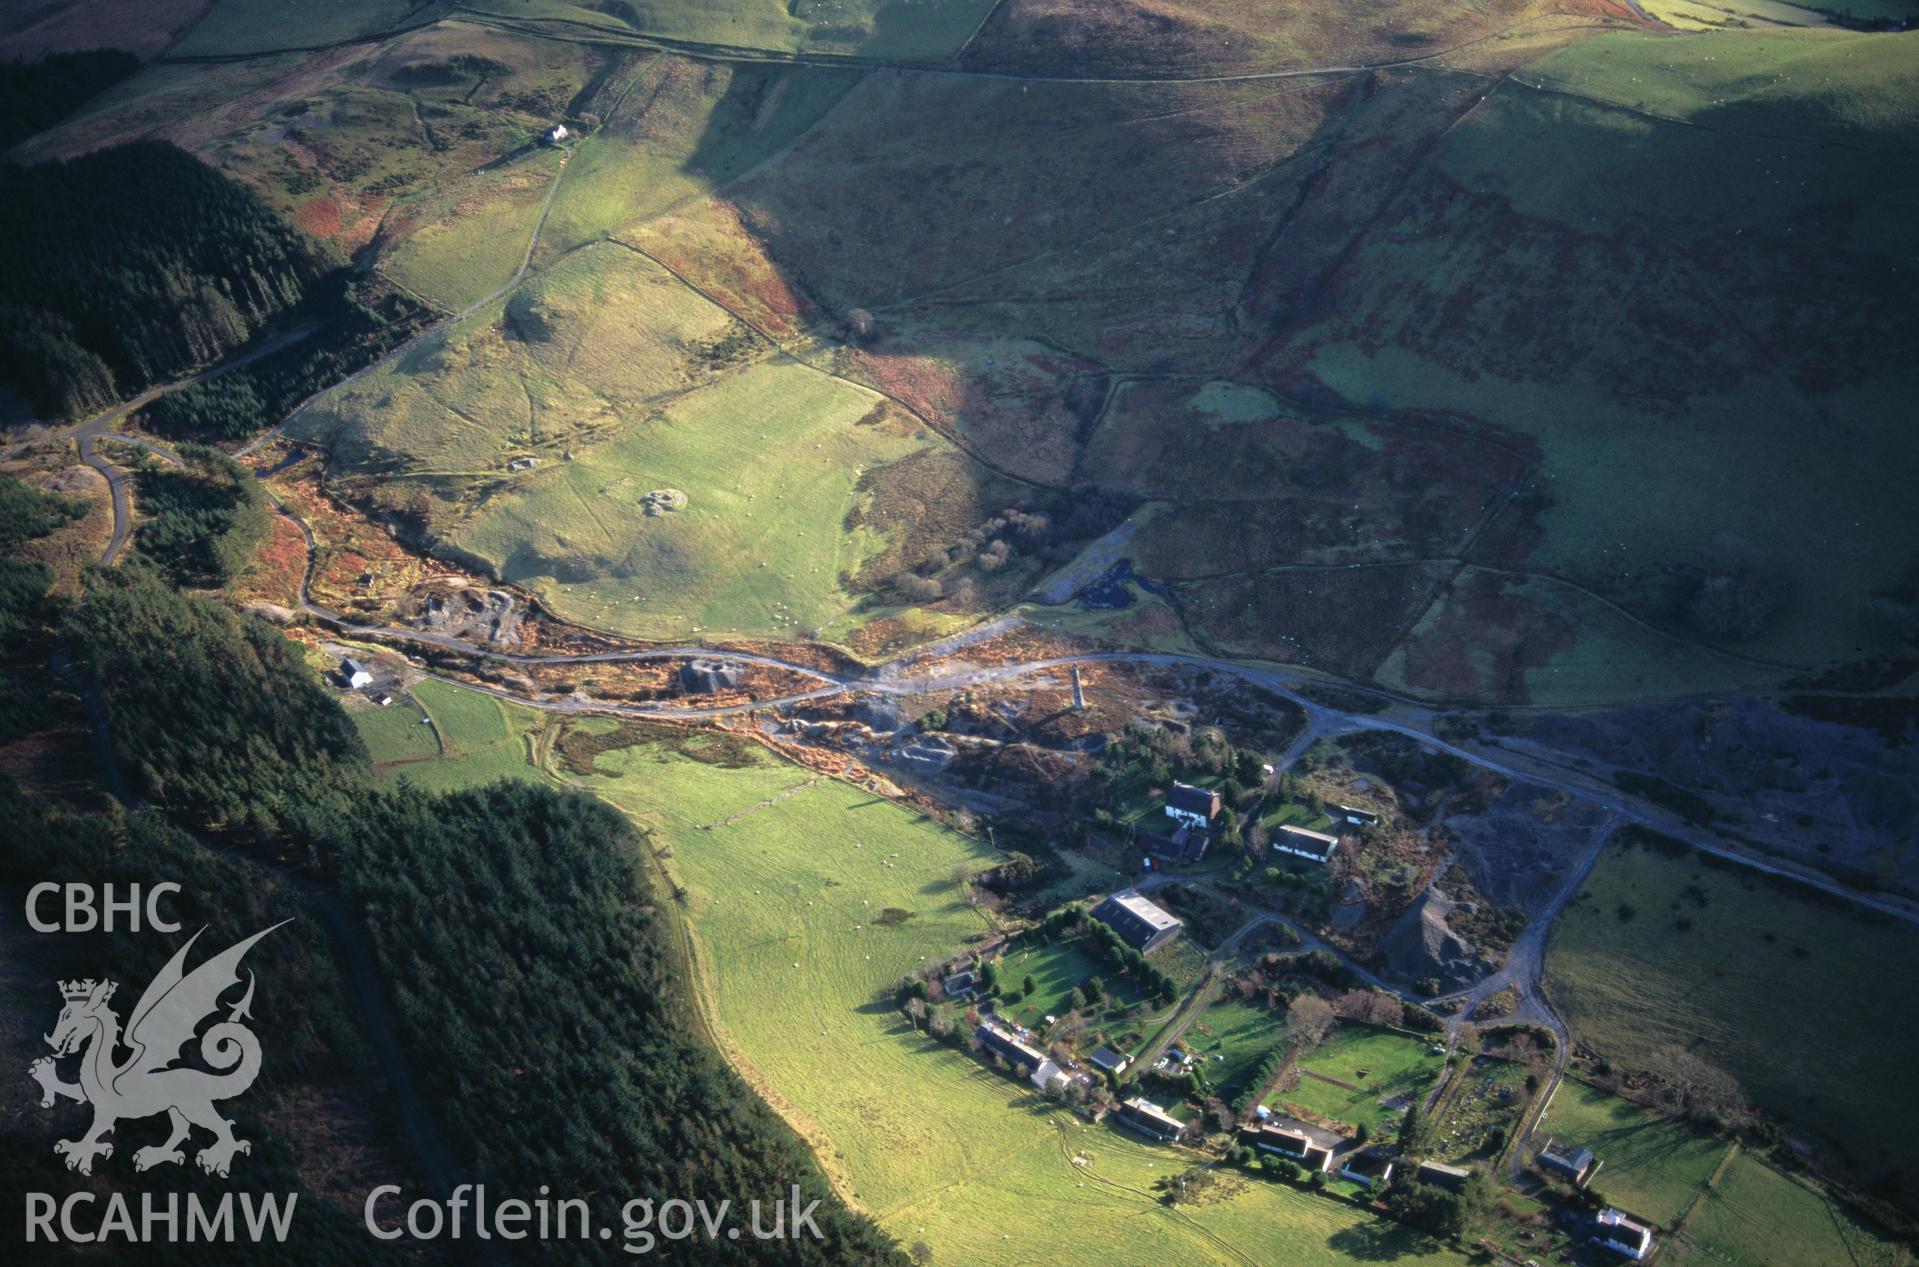 Slide of RCAHMW colour oblique aerial photograph of Cwmsymlog Lead Mine (general);east Darren Lead Mine, taken by T.G. Driver, 4/12/1998.